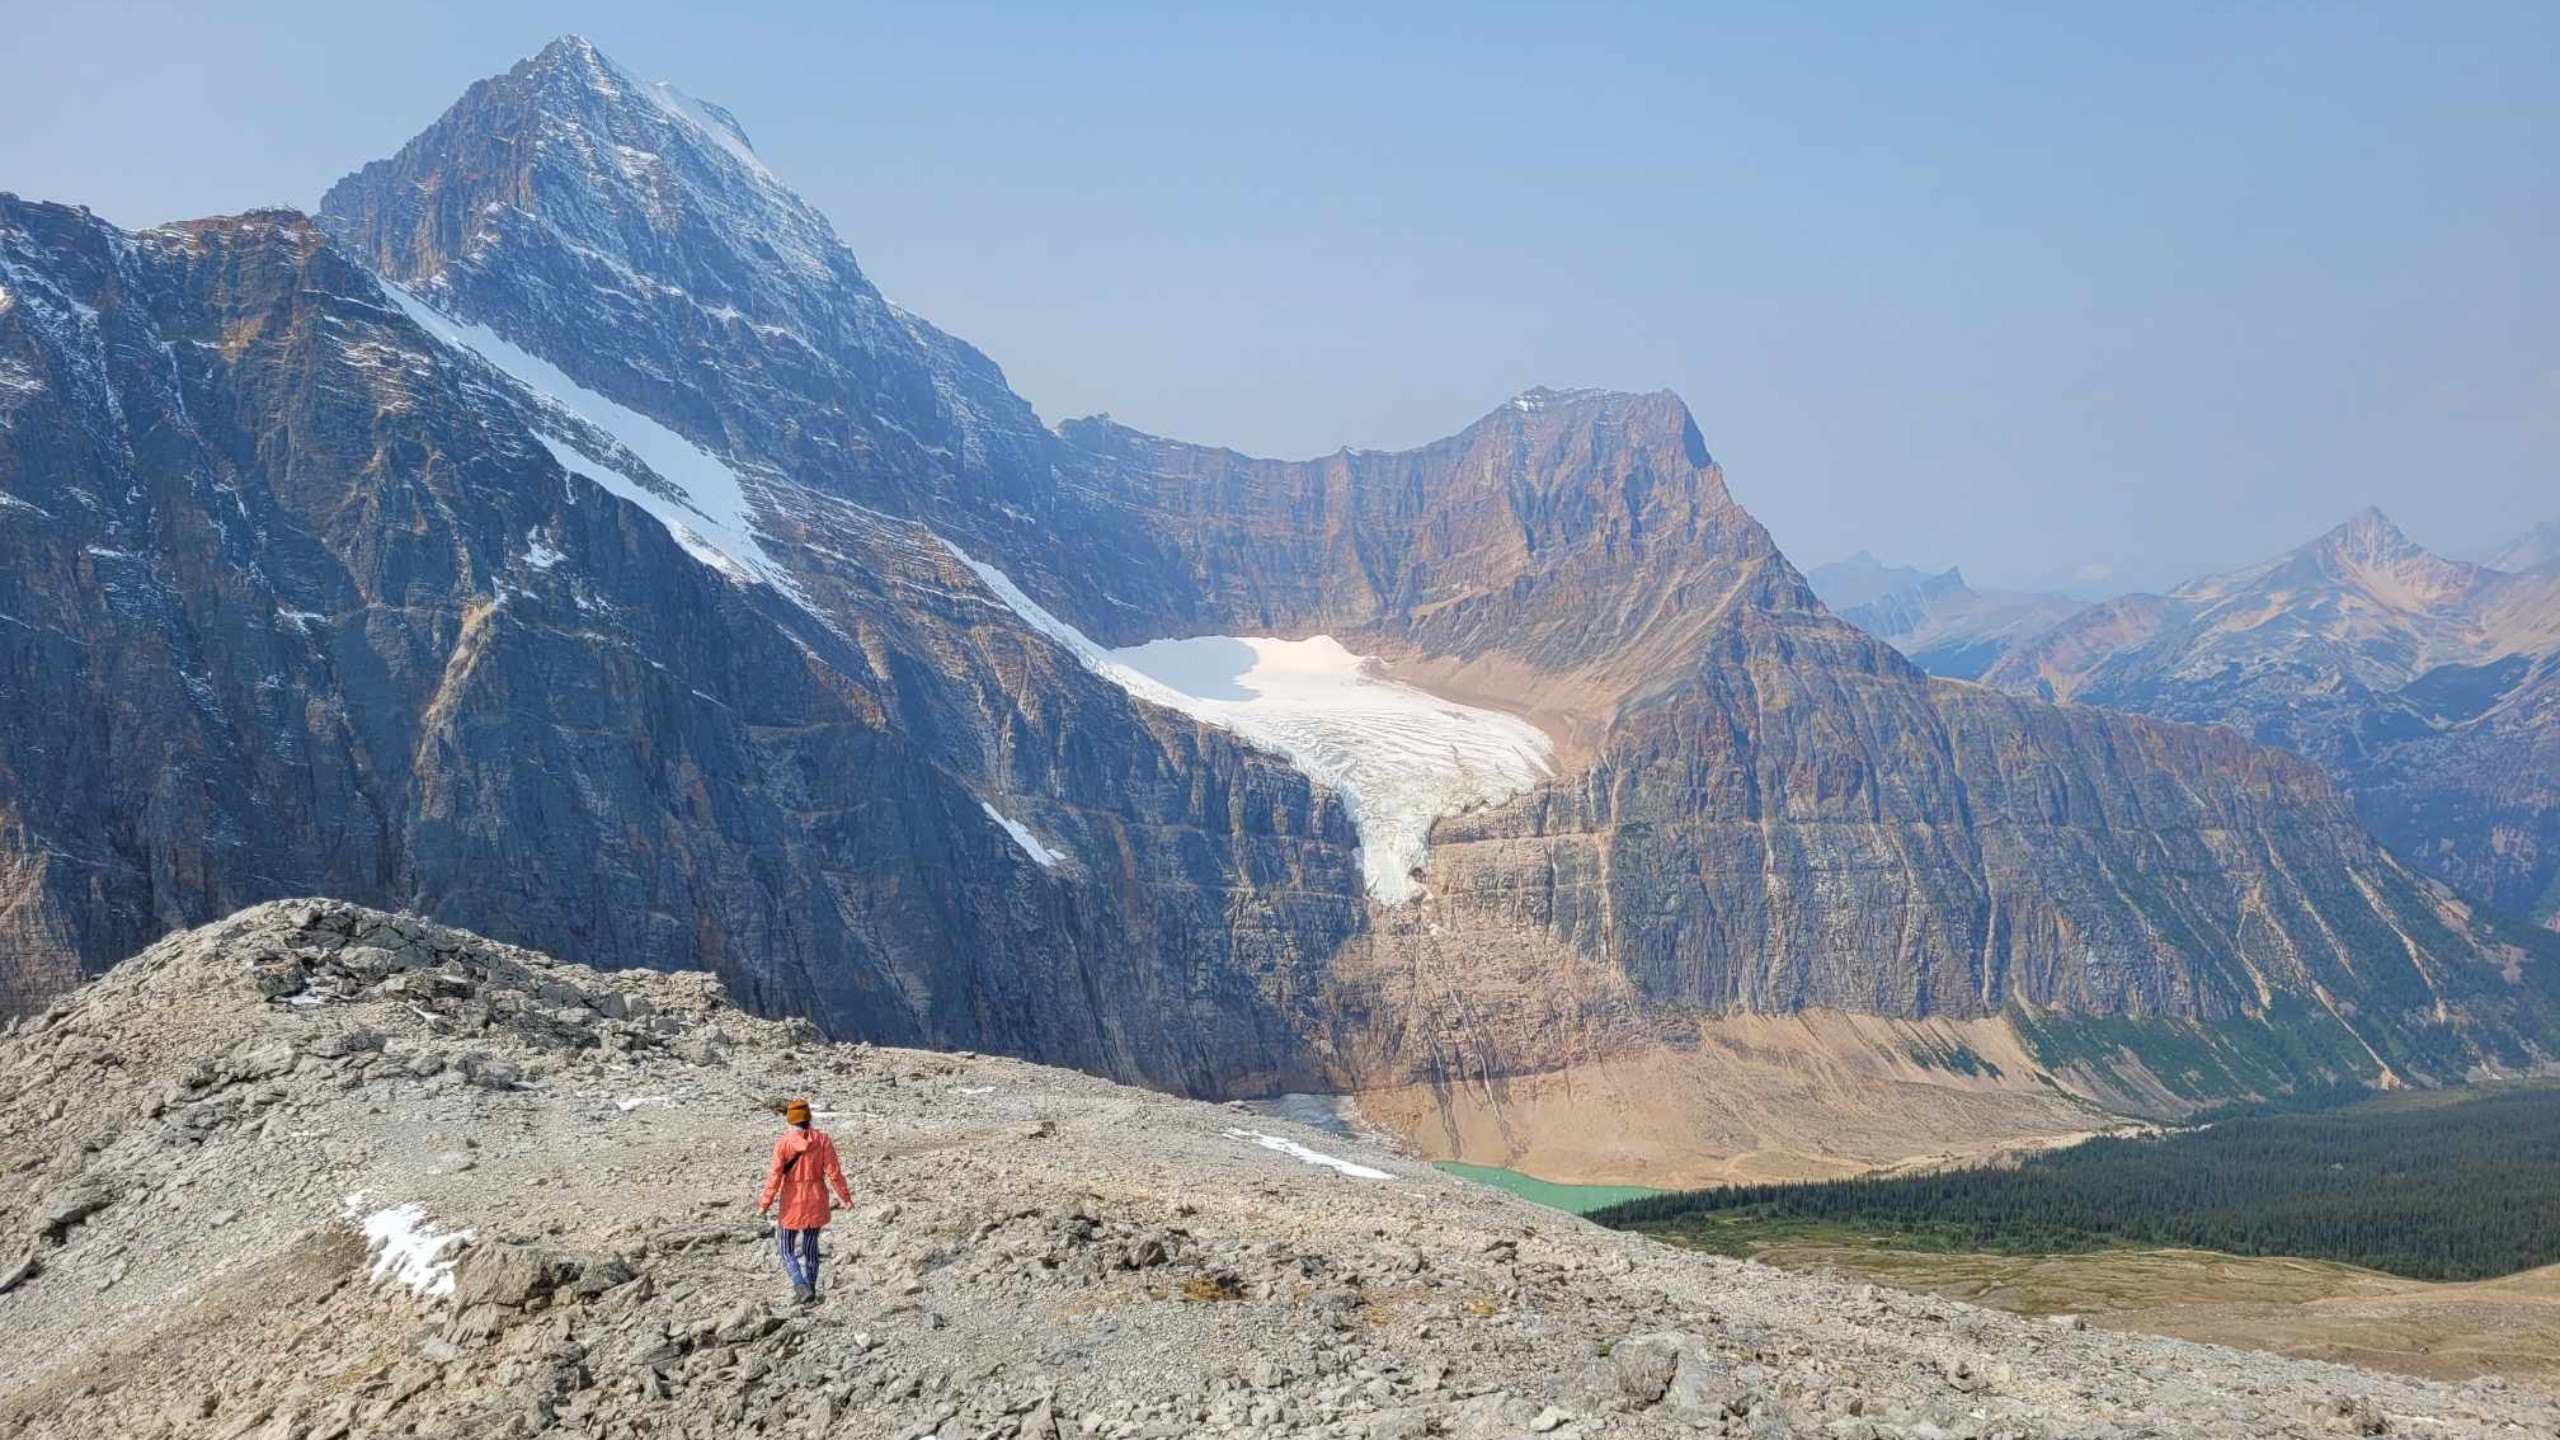 Enjoy the beautiful Angel Glacier at Mount Edith Cavell.